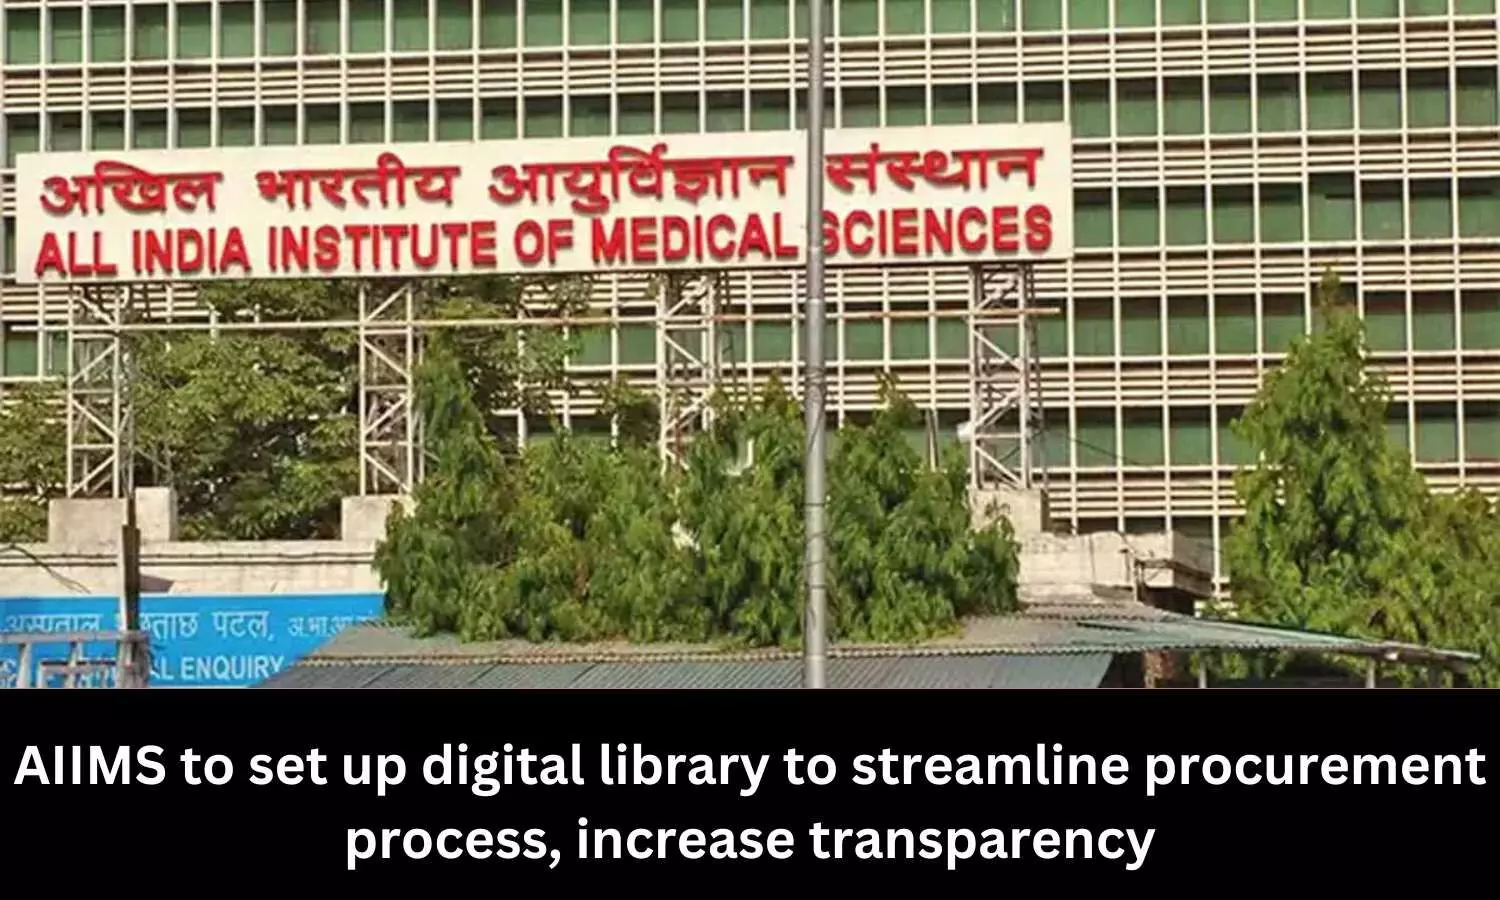 AIIMS to set up digital library to streamline procurement process, increase transparency